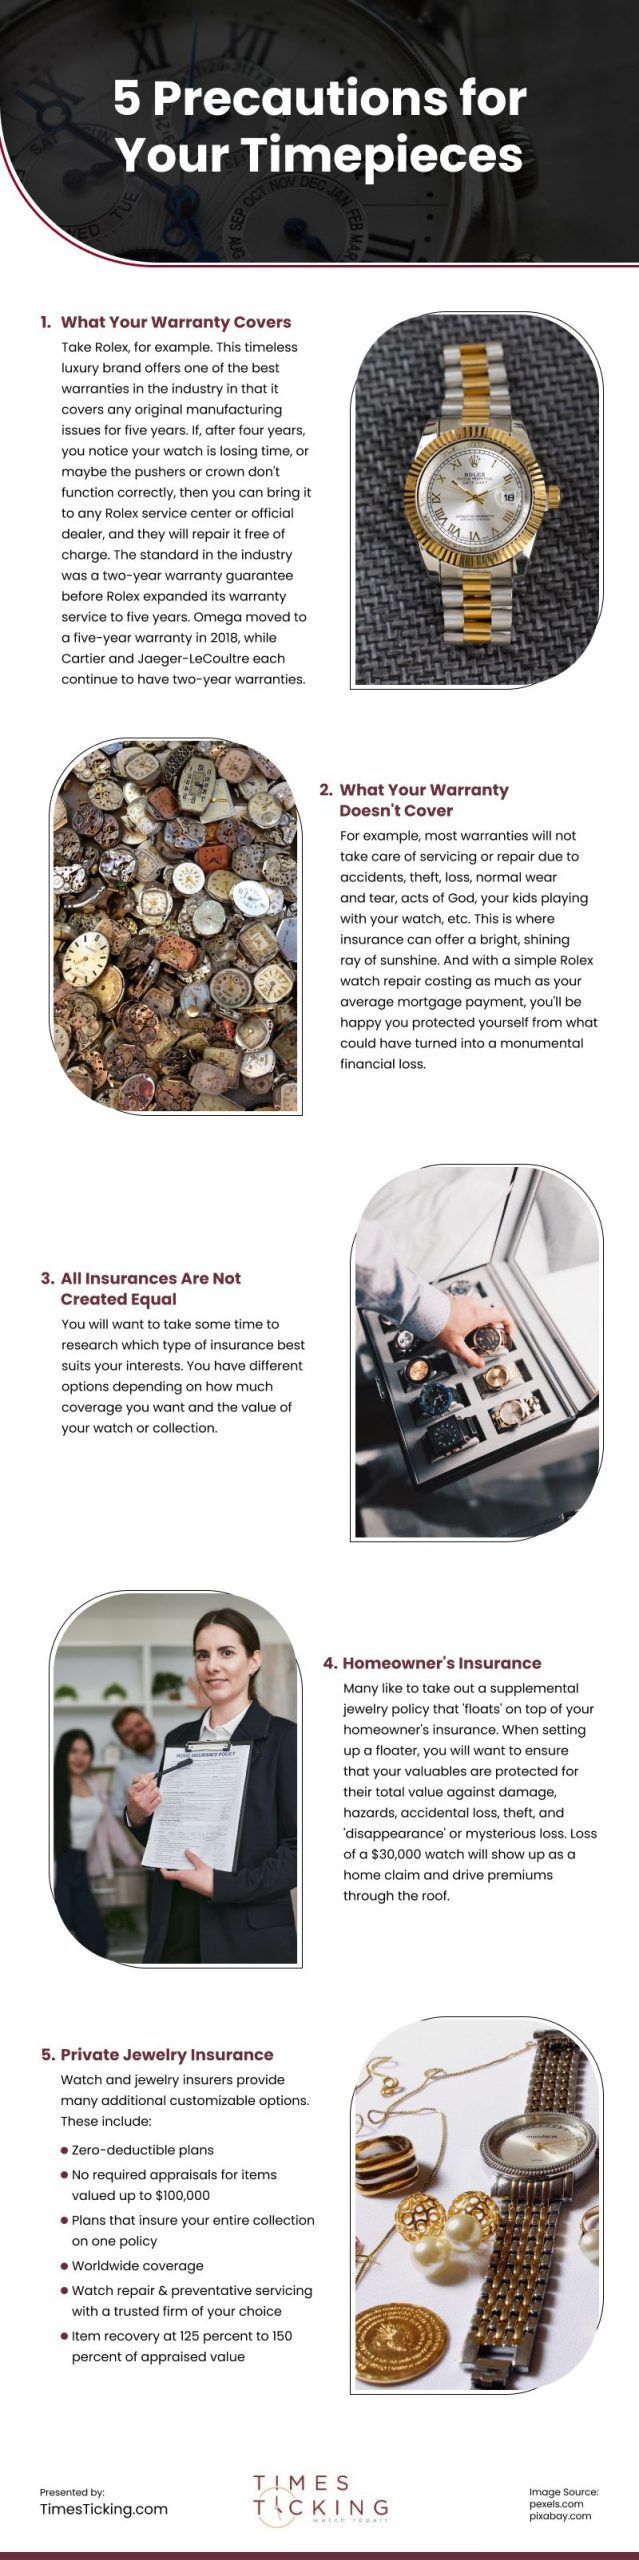 5 Precautions for Your Timepieces Infographic